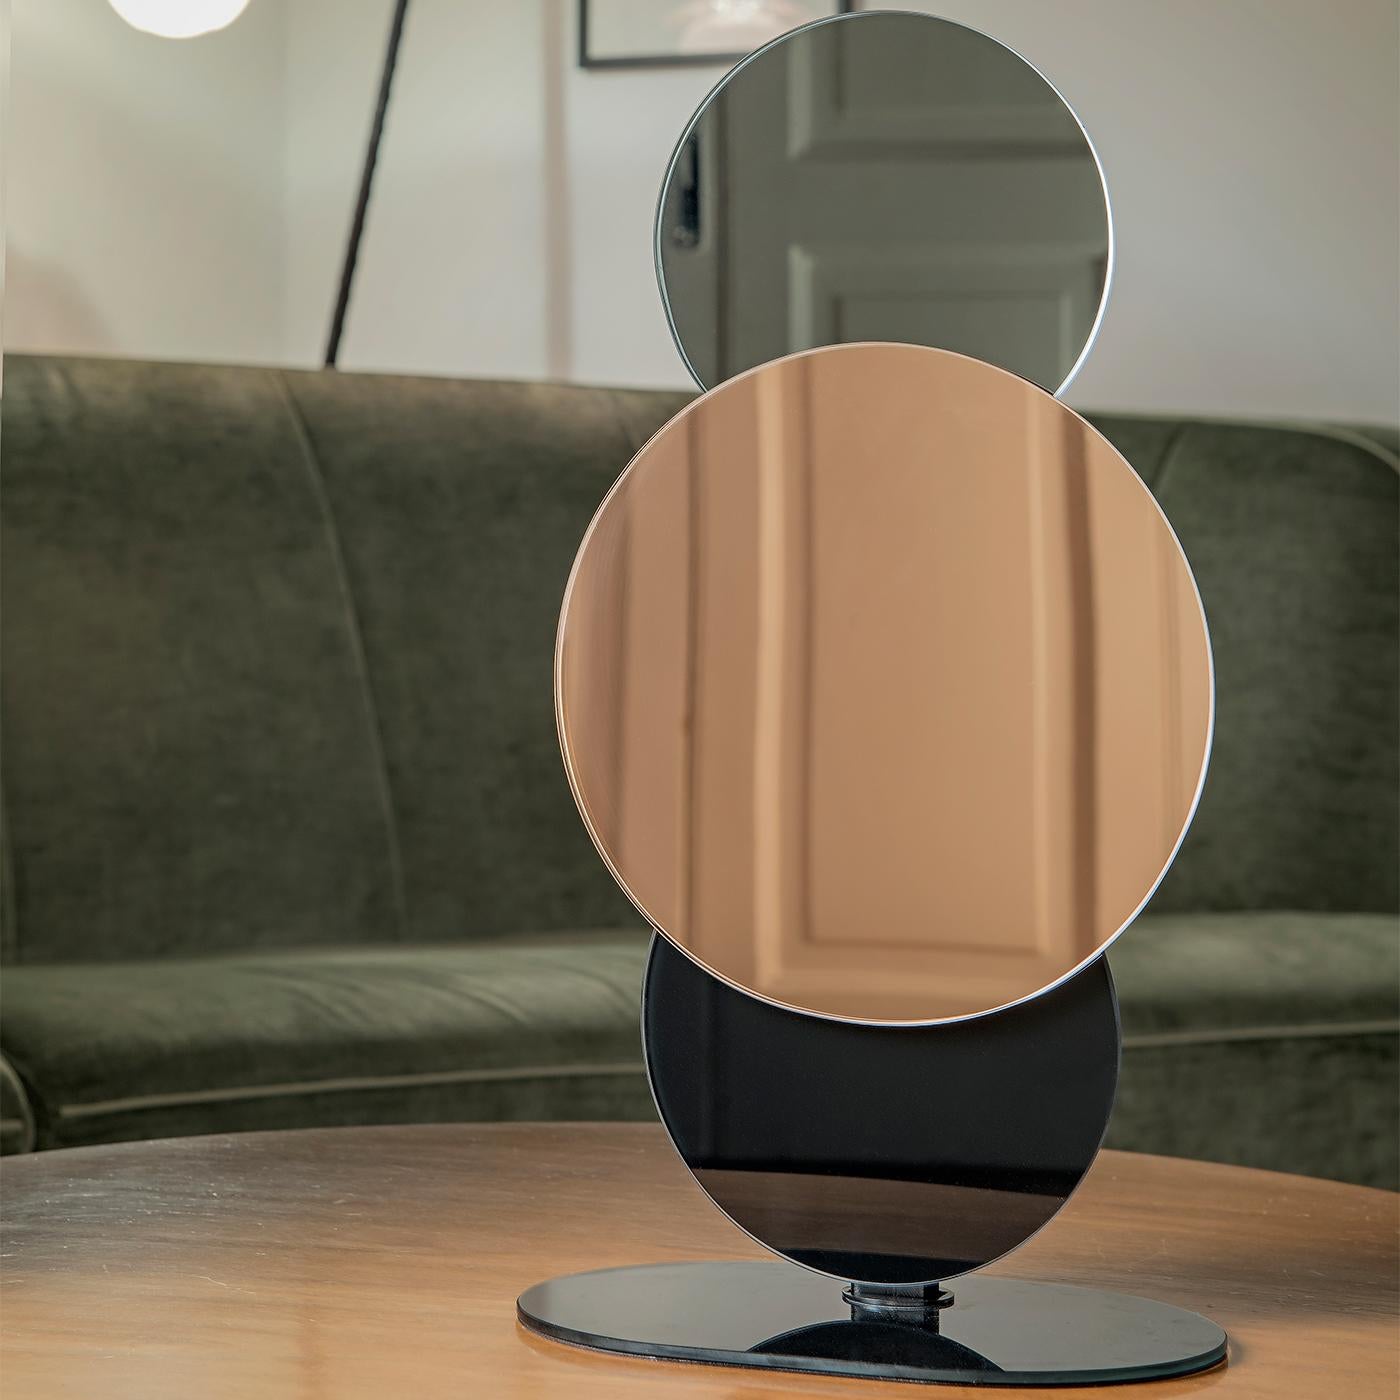 Italian Equilibrista O2 Tabletop Mirror For Sale